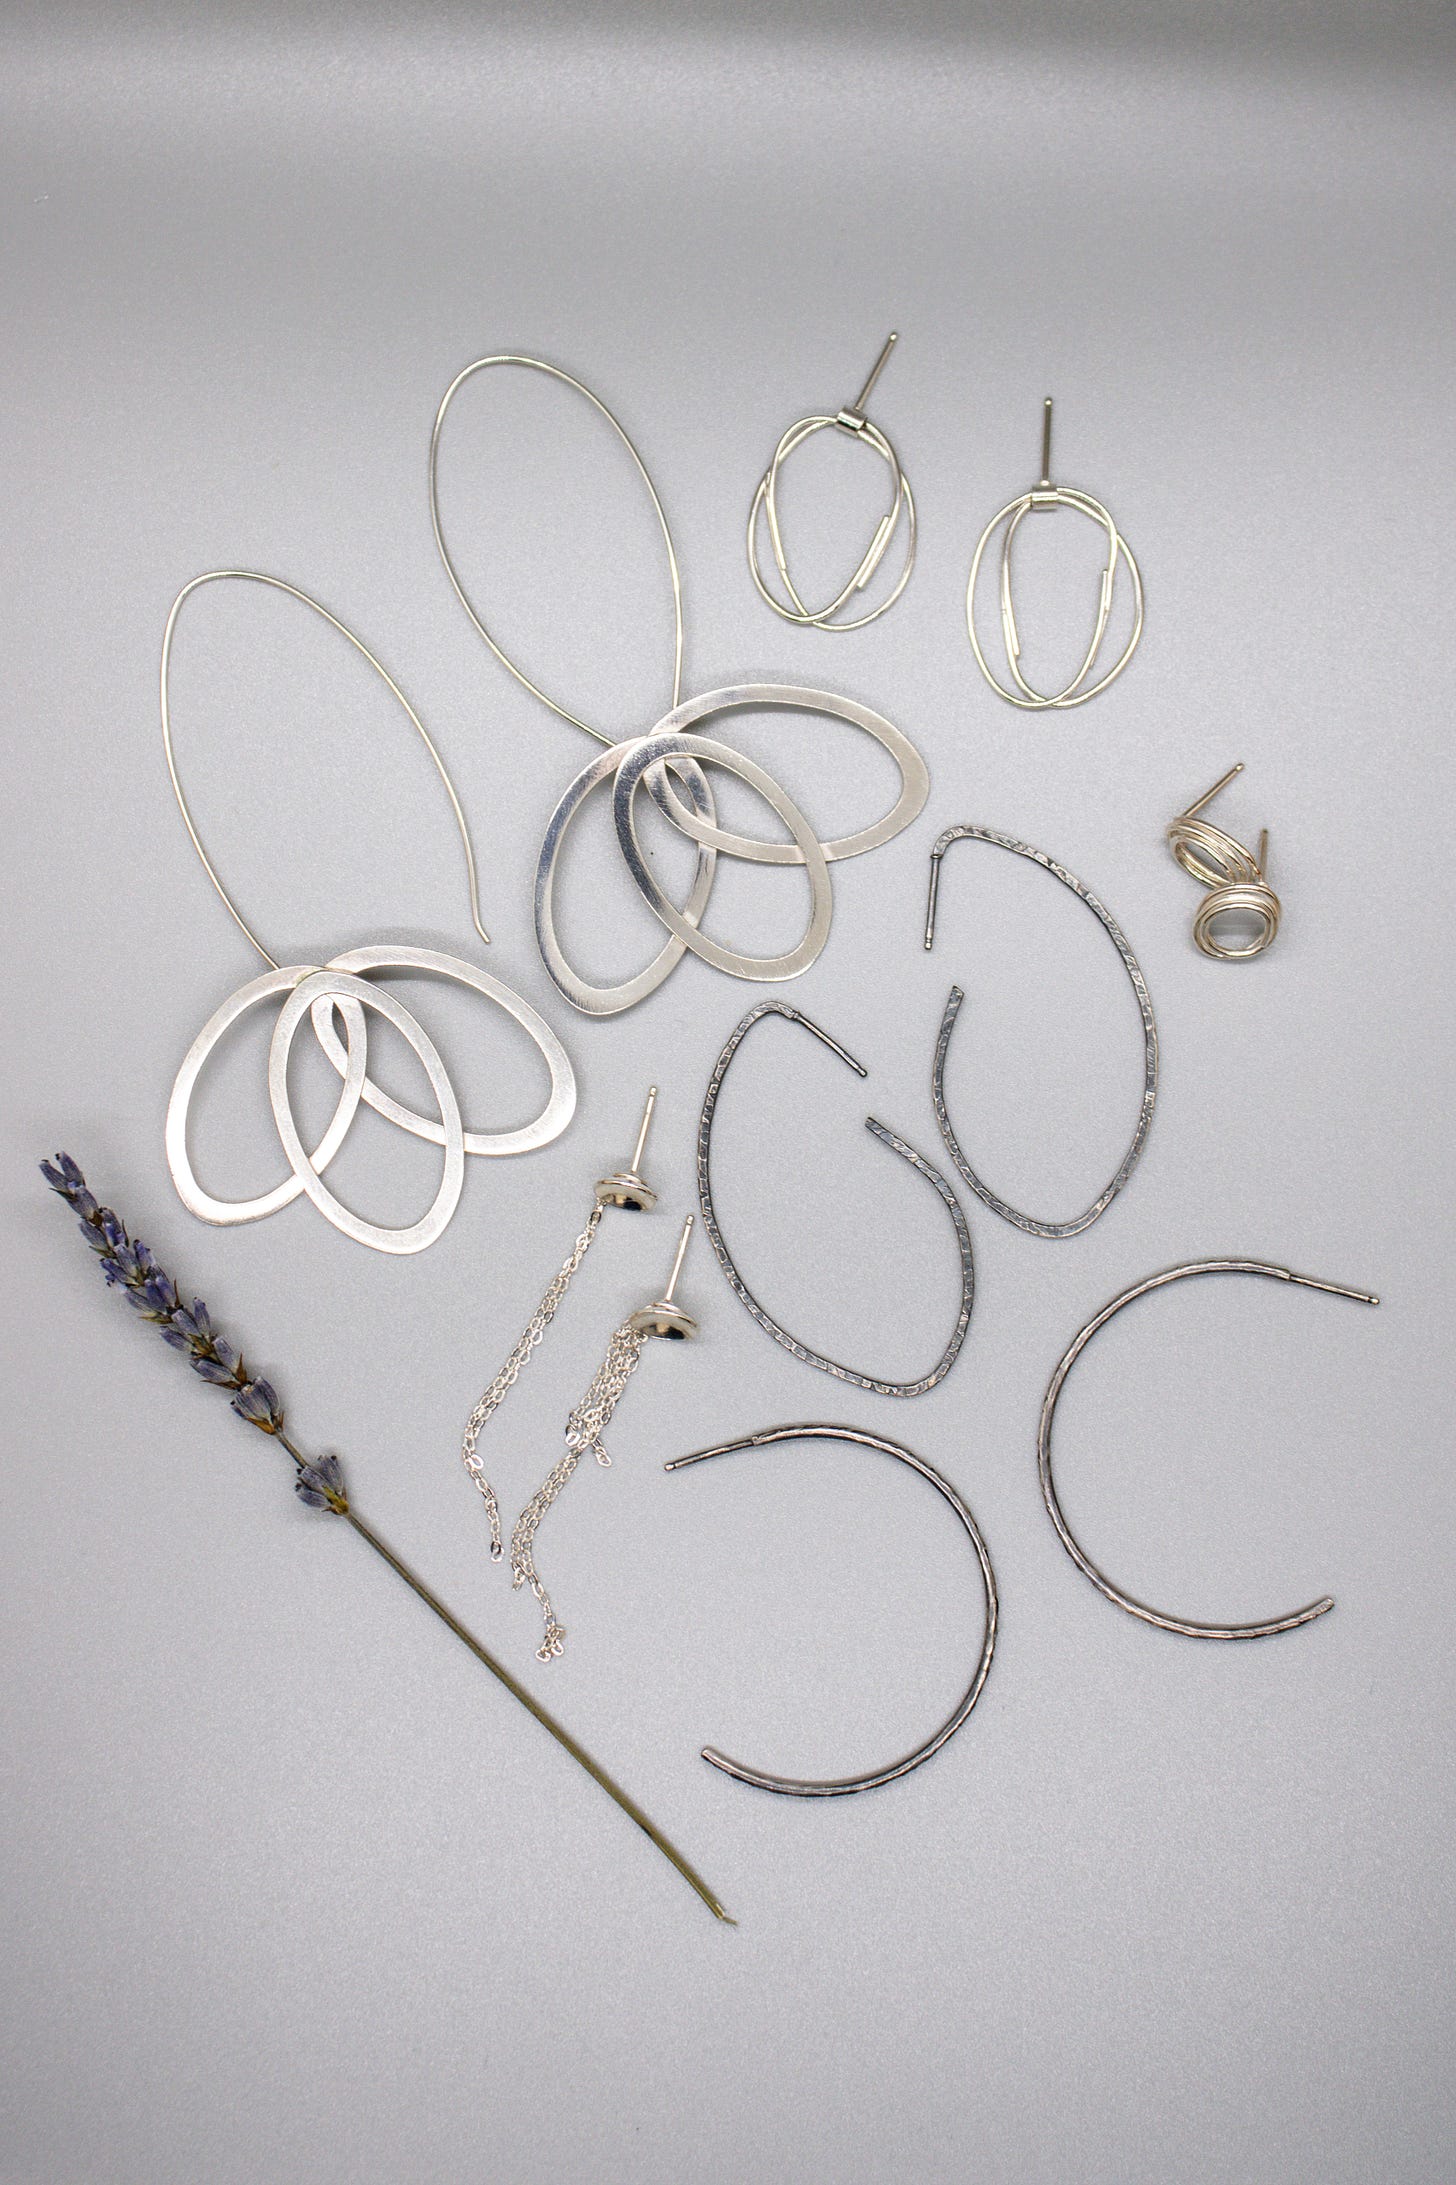 Image Description: A photo of A. Clarke Metalsmith jewelry pieces. On the bottom left is a dried stalk of lavender. From the top left to right are Stella Drops (3 ovals connected at the top, made of sterling silver pair brushed with steel wool), India's Studs (a silver circle of metal whose ends wind around the circle like arms in a hug), silver studs (tightly wound coils), Lynnelle's Hoops (large angled hoops with textured notched metal), Hope's Hoops (medium-sized traditional hoops with textured notched metal), and Lisa's Studs (silver curved disks with thin strands of chain hanging down)